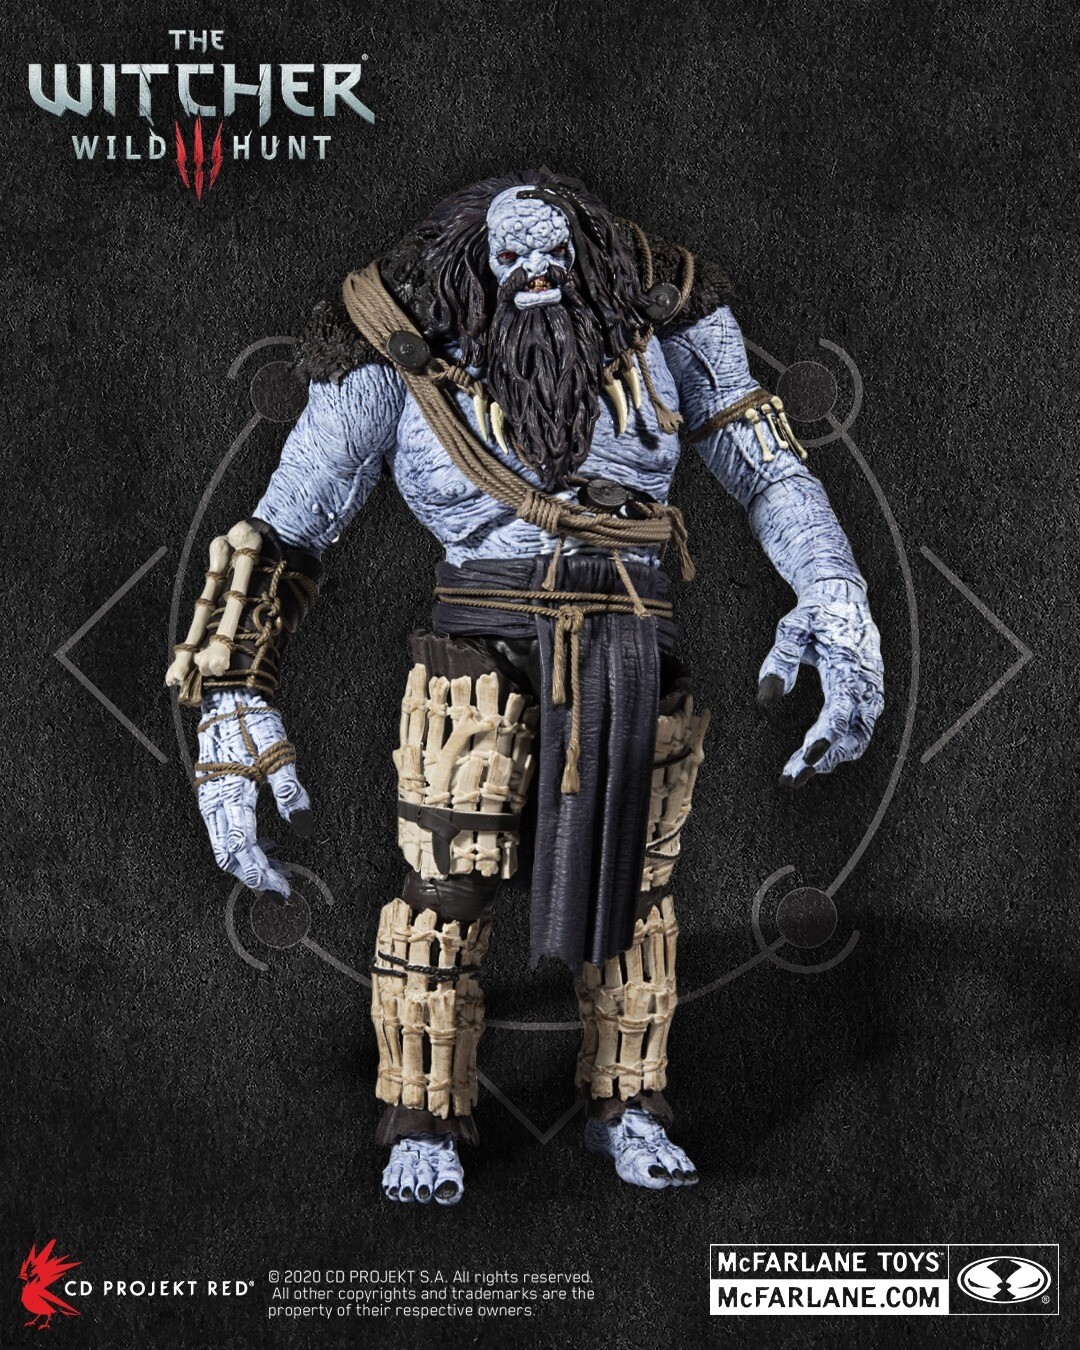 The Witcher - Ice Giant - Engineering and joint articulation.